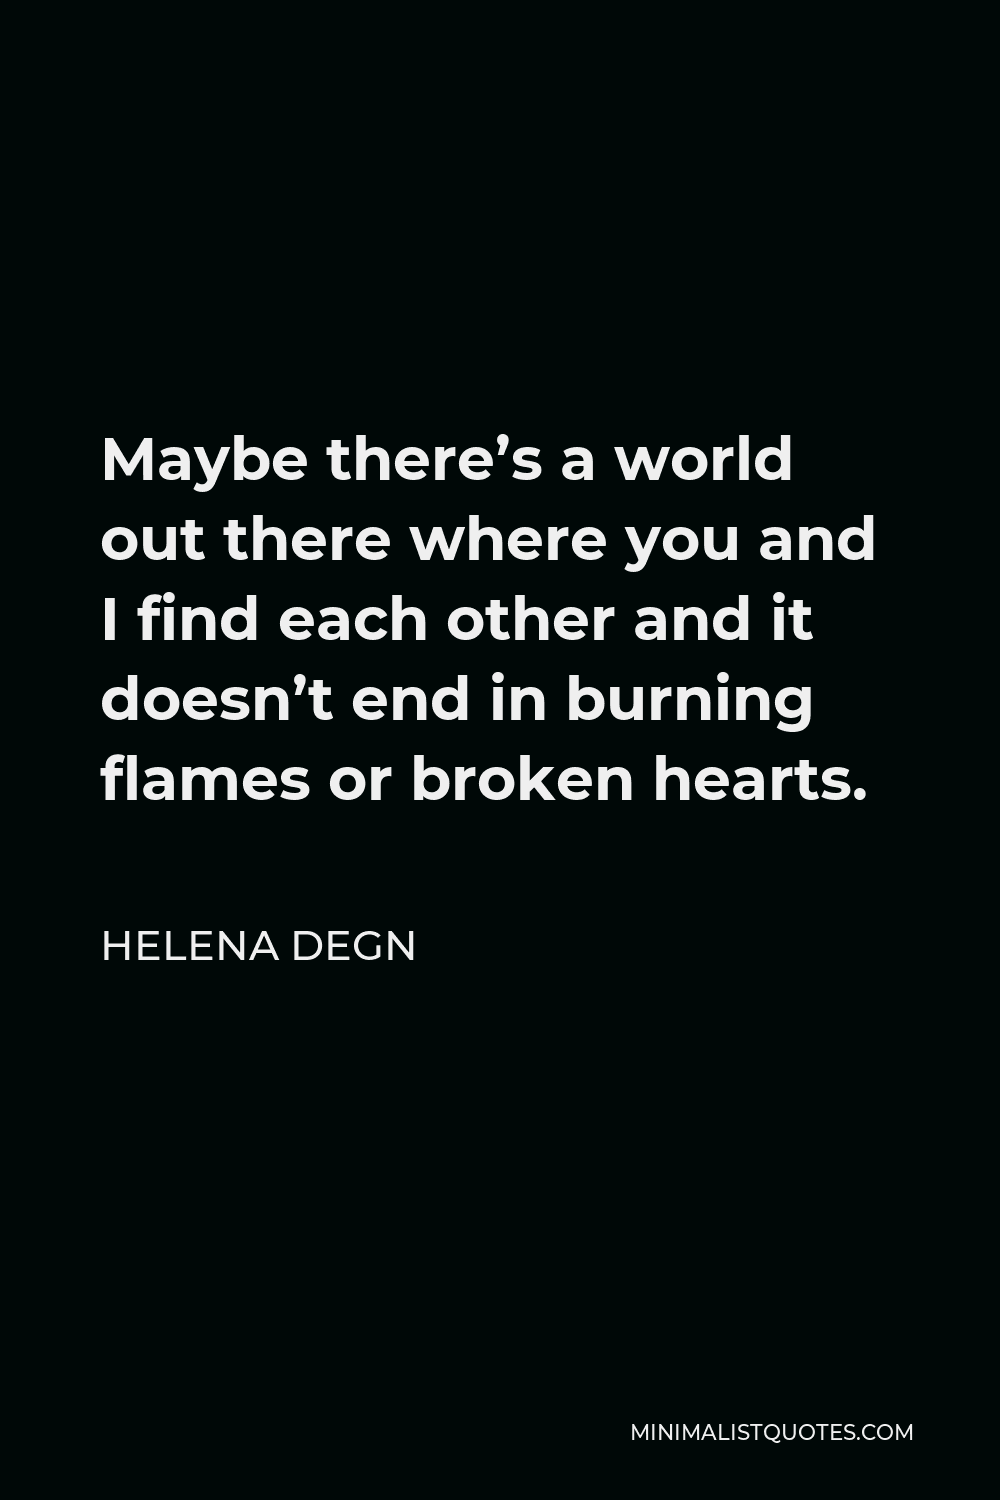 Helena Degn Quote - Maybe there’s a world out there where you and I find each other and it doesn’t end in burning flames or broken hearts.